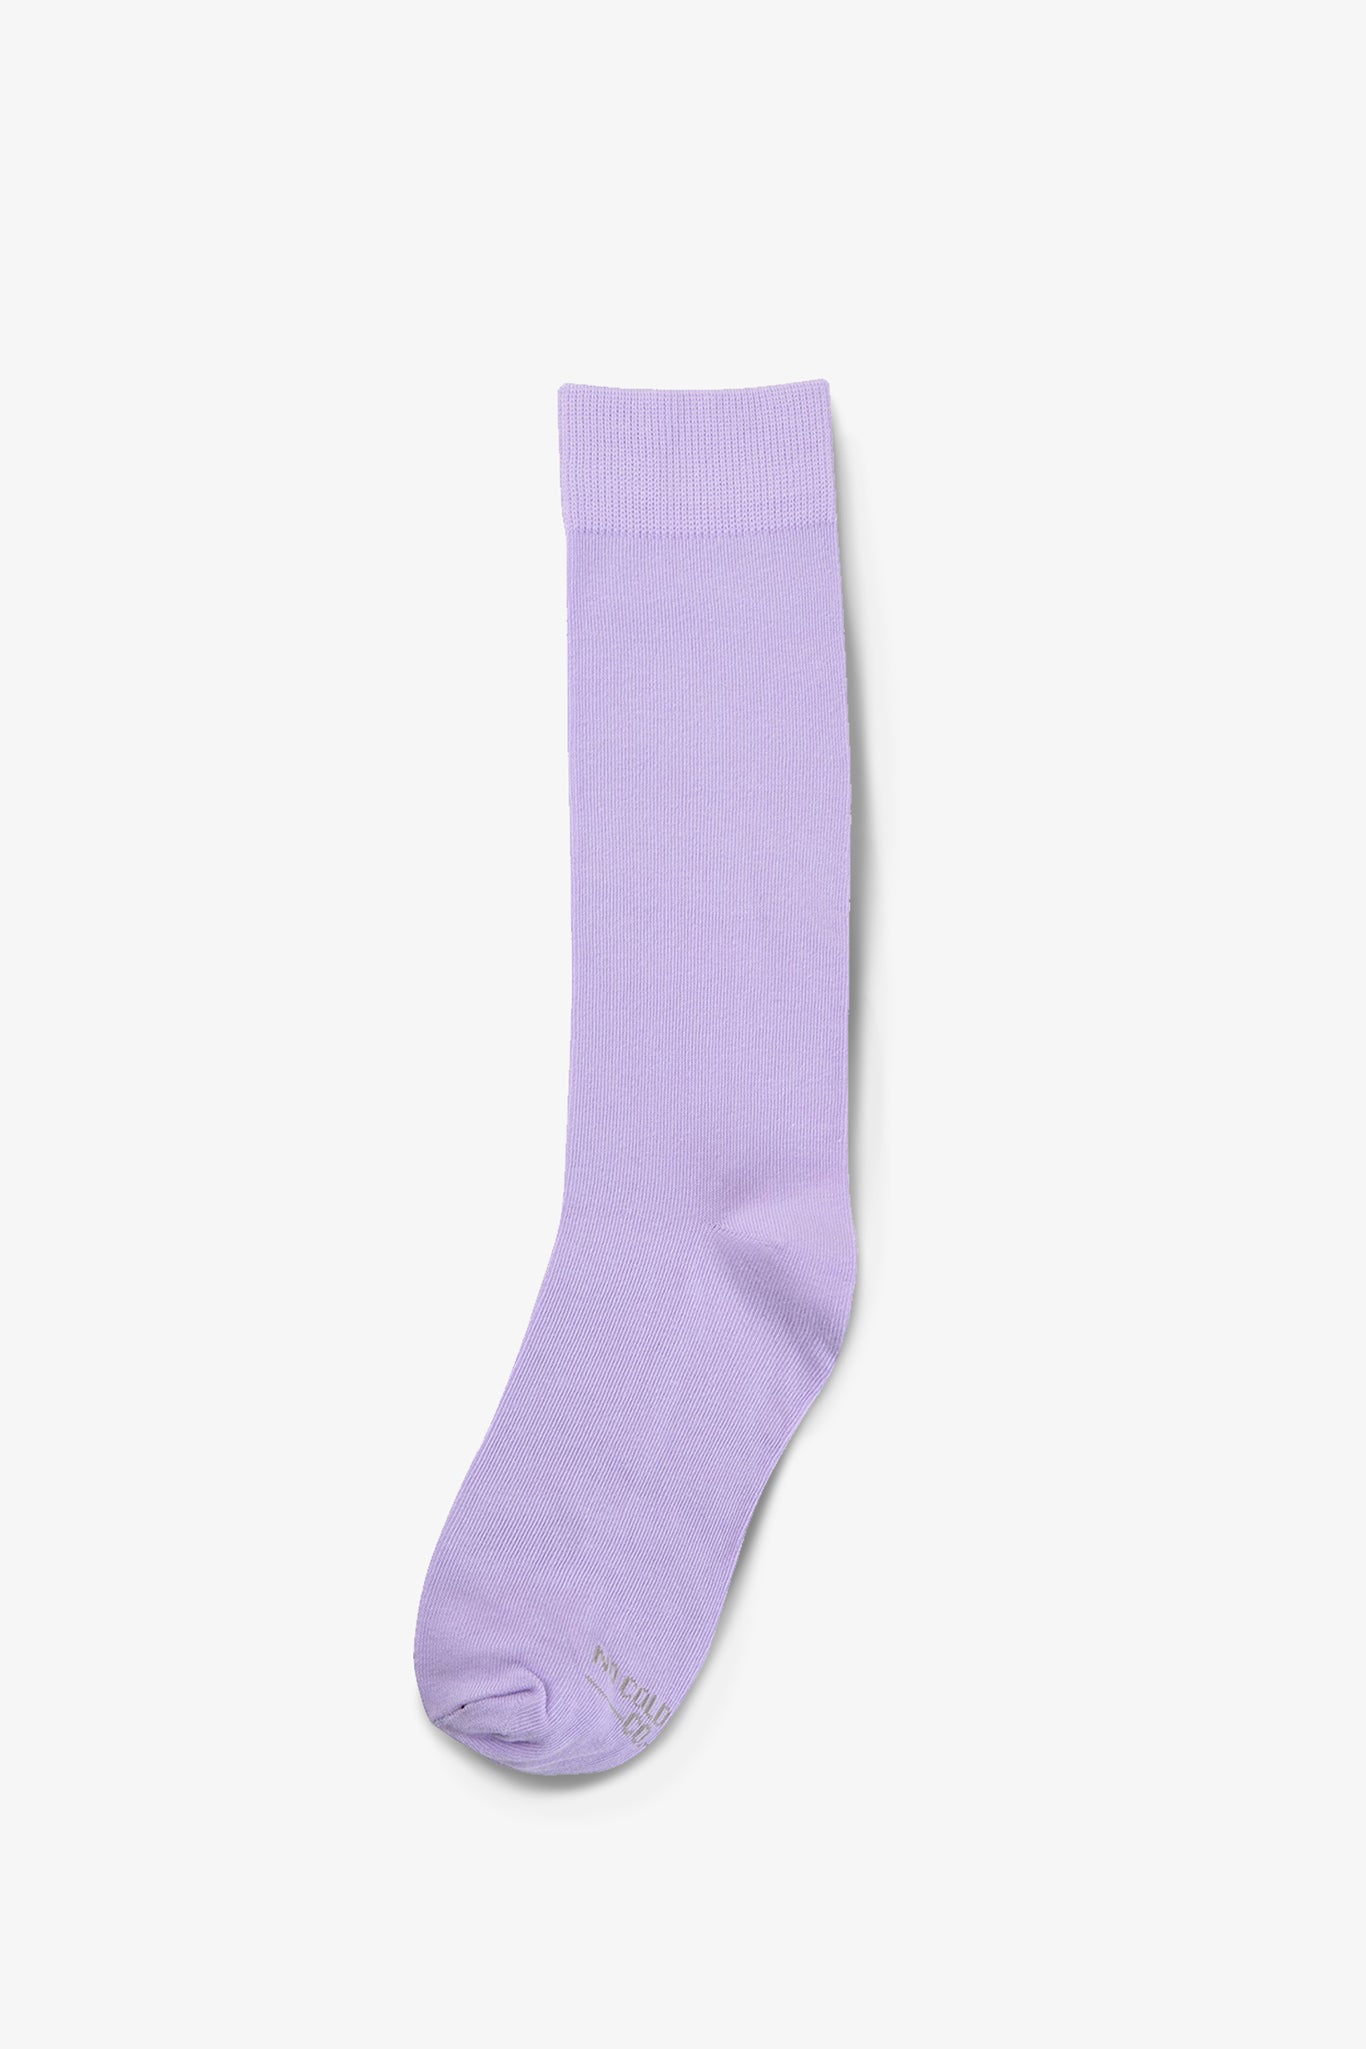 Solid Lilac Groomsmen Socks by No Cold Feet